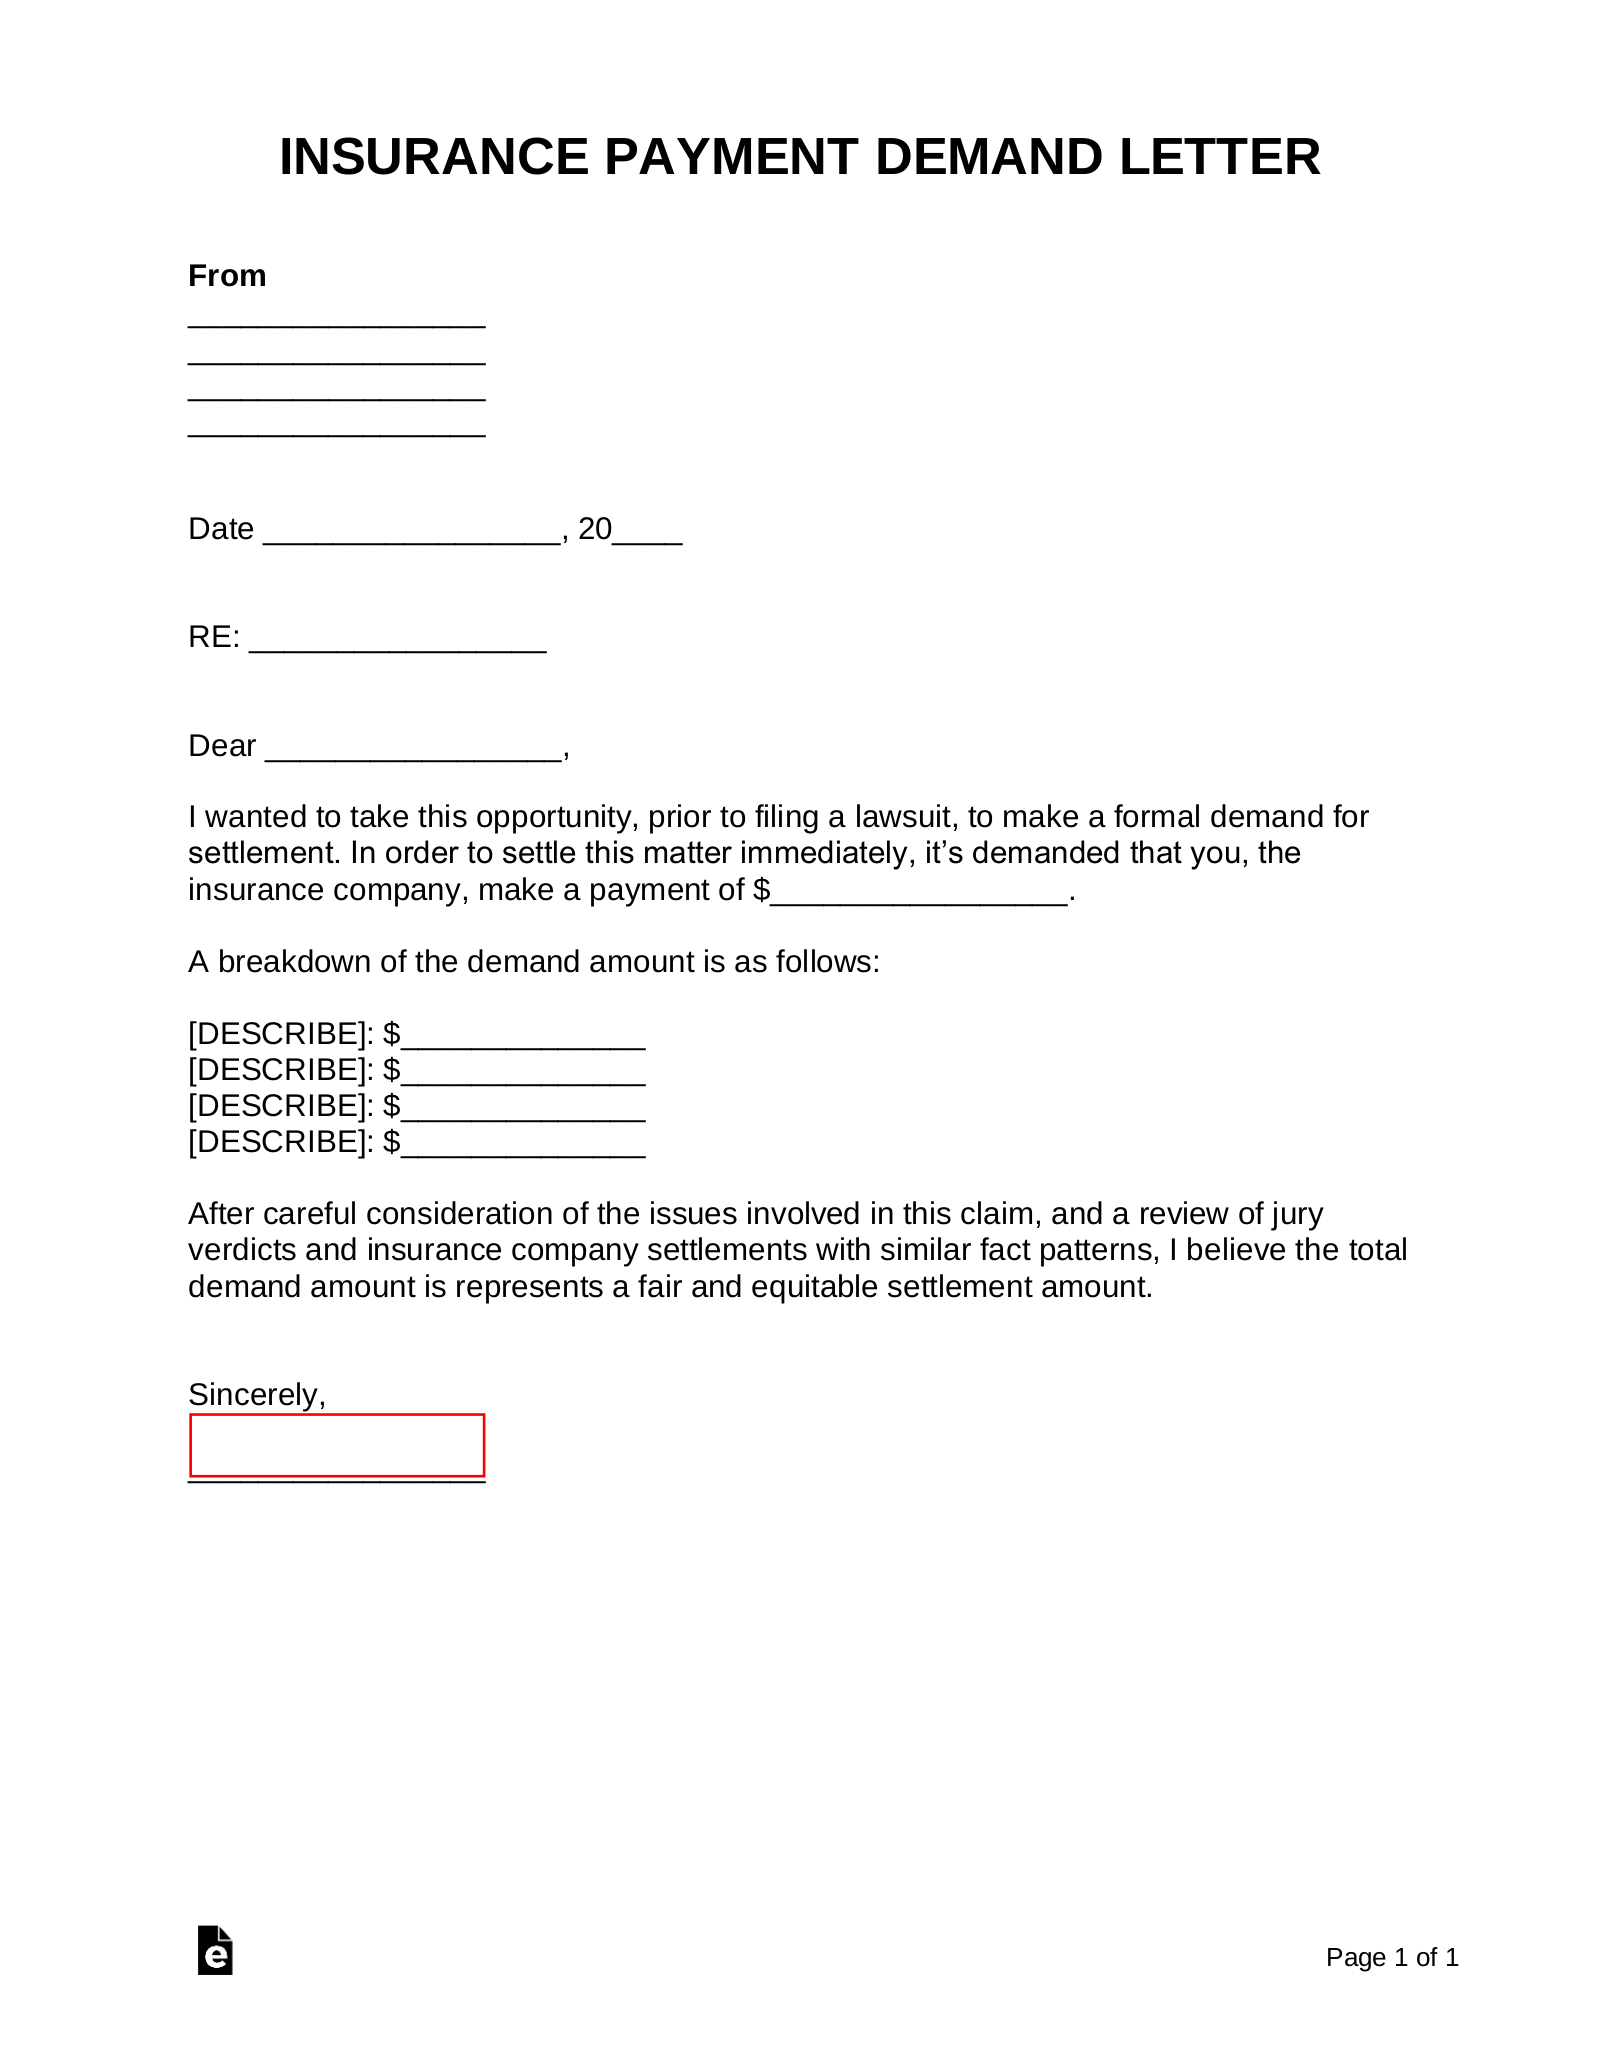 Insurance Demand Letter Template from eforms.com